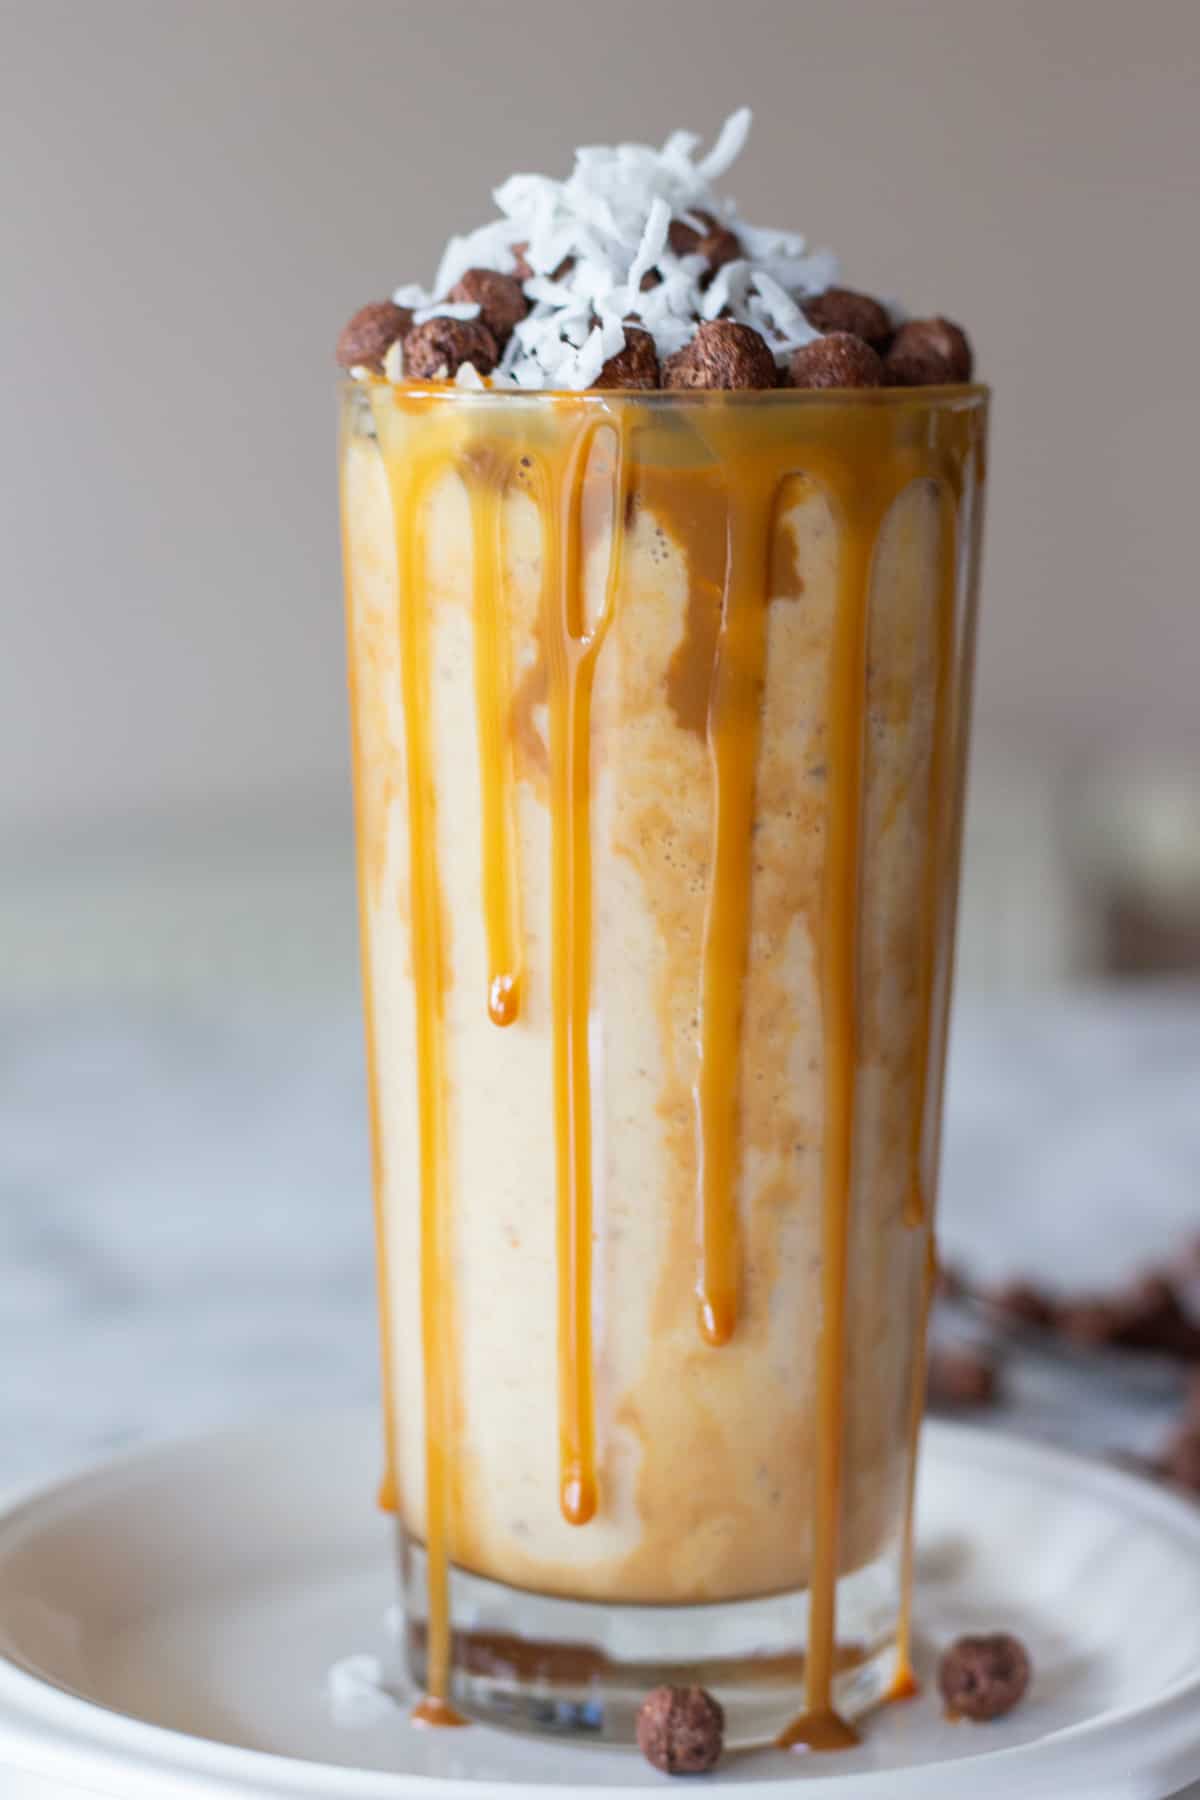 This Banana Peanut Butter Coco Puff Milkshake will make your breakfast more exciting and delicious because it has all the best flavor combinations in one tall glass!